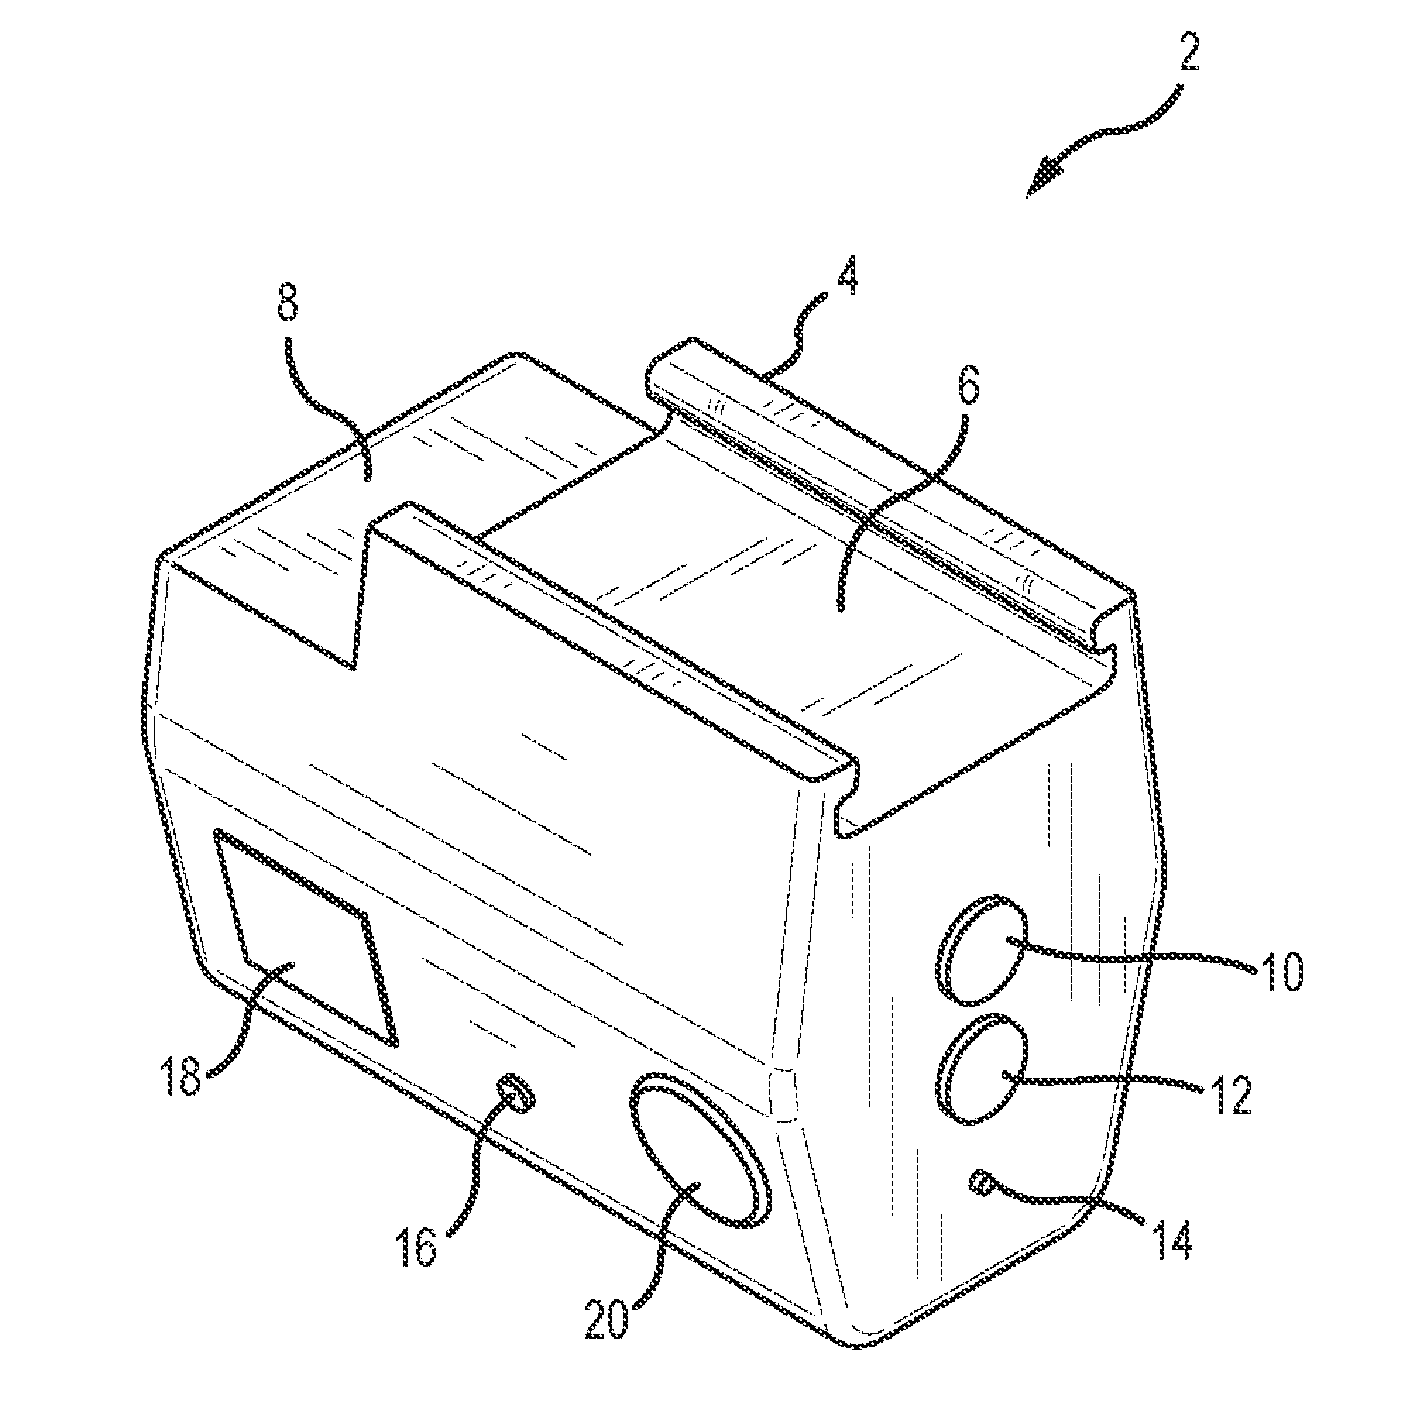 Emergency assistance method and device for a firearm